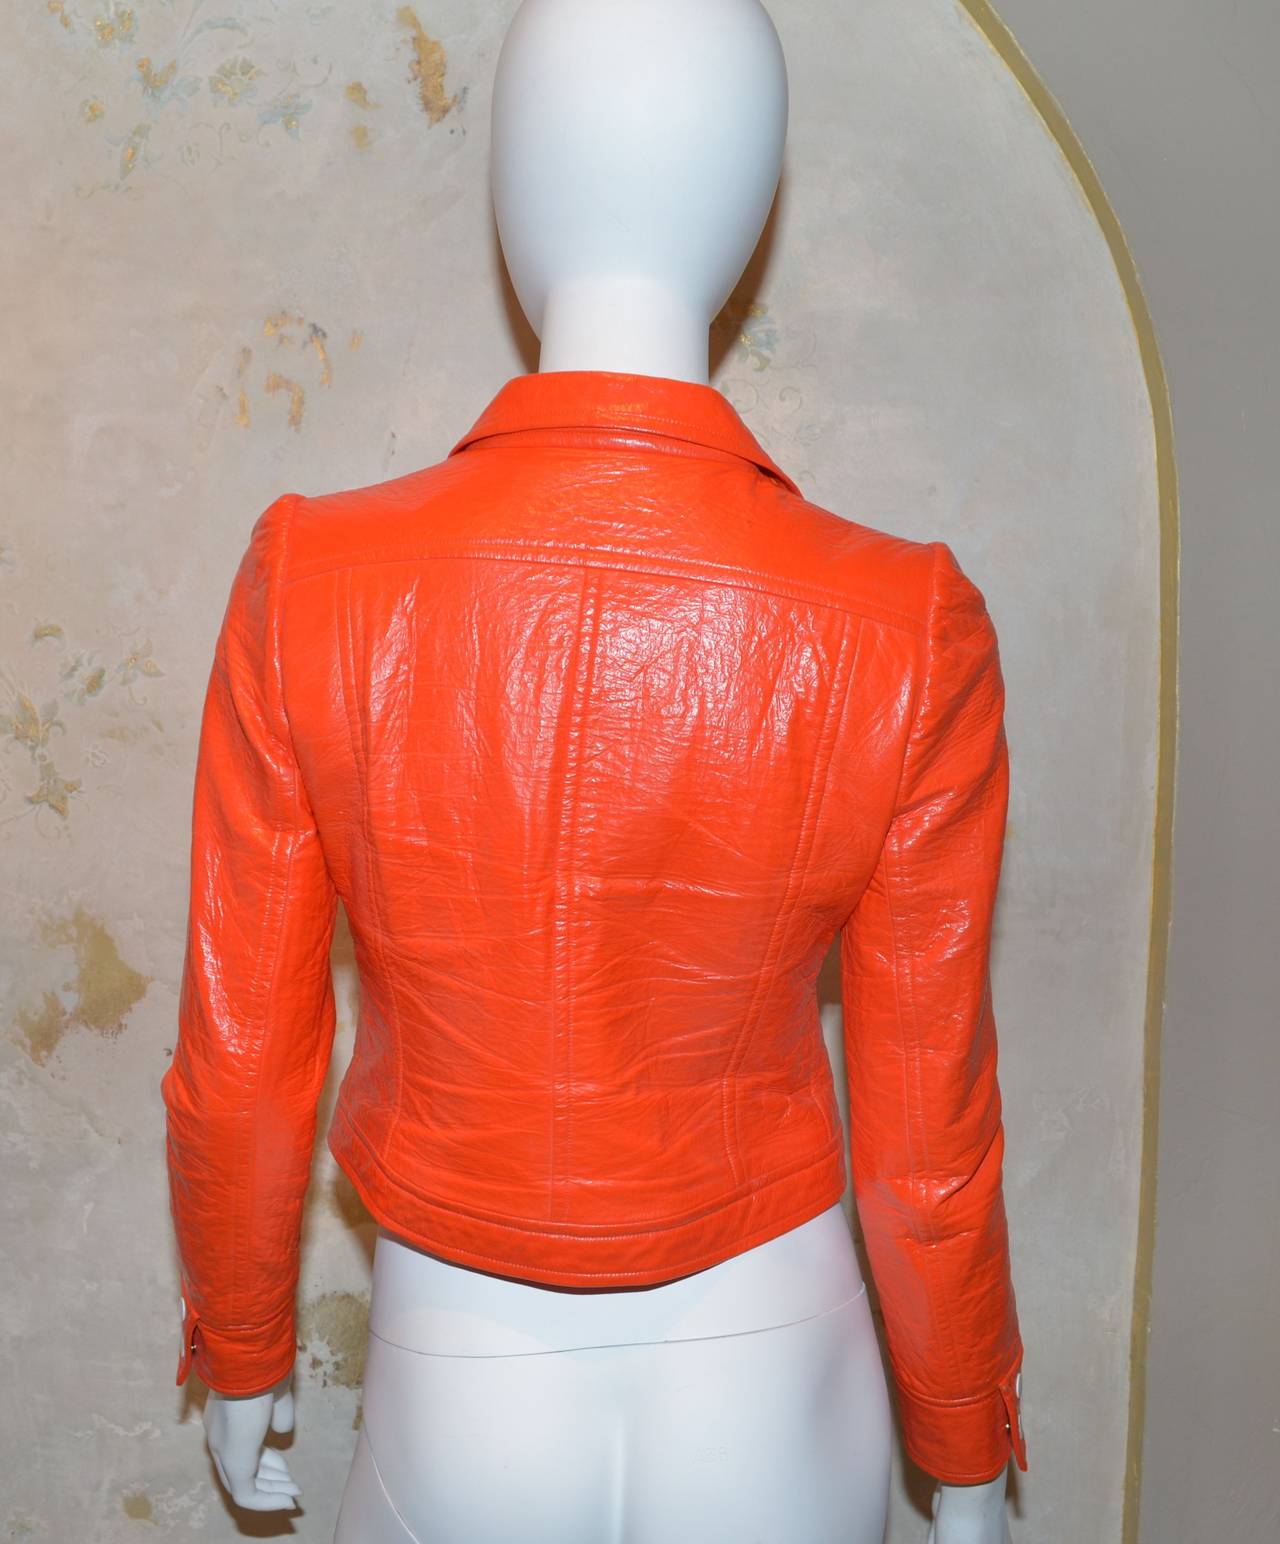 Courreges 1960's vinyl jacket features Large AC logo as seen on Sharon Stone in Casino. Snap-stud button closures along the front and on the cuffs as well. Original Courreges logo at the left bust. Jacket is made with 85% cotton and 15% spandex, and